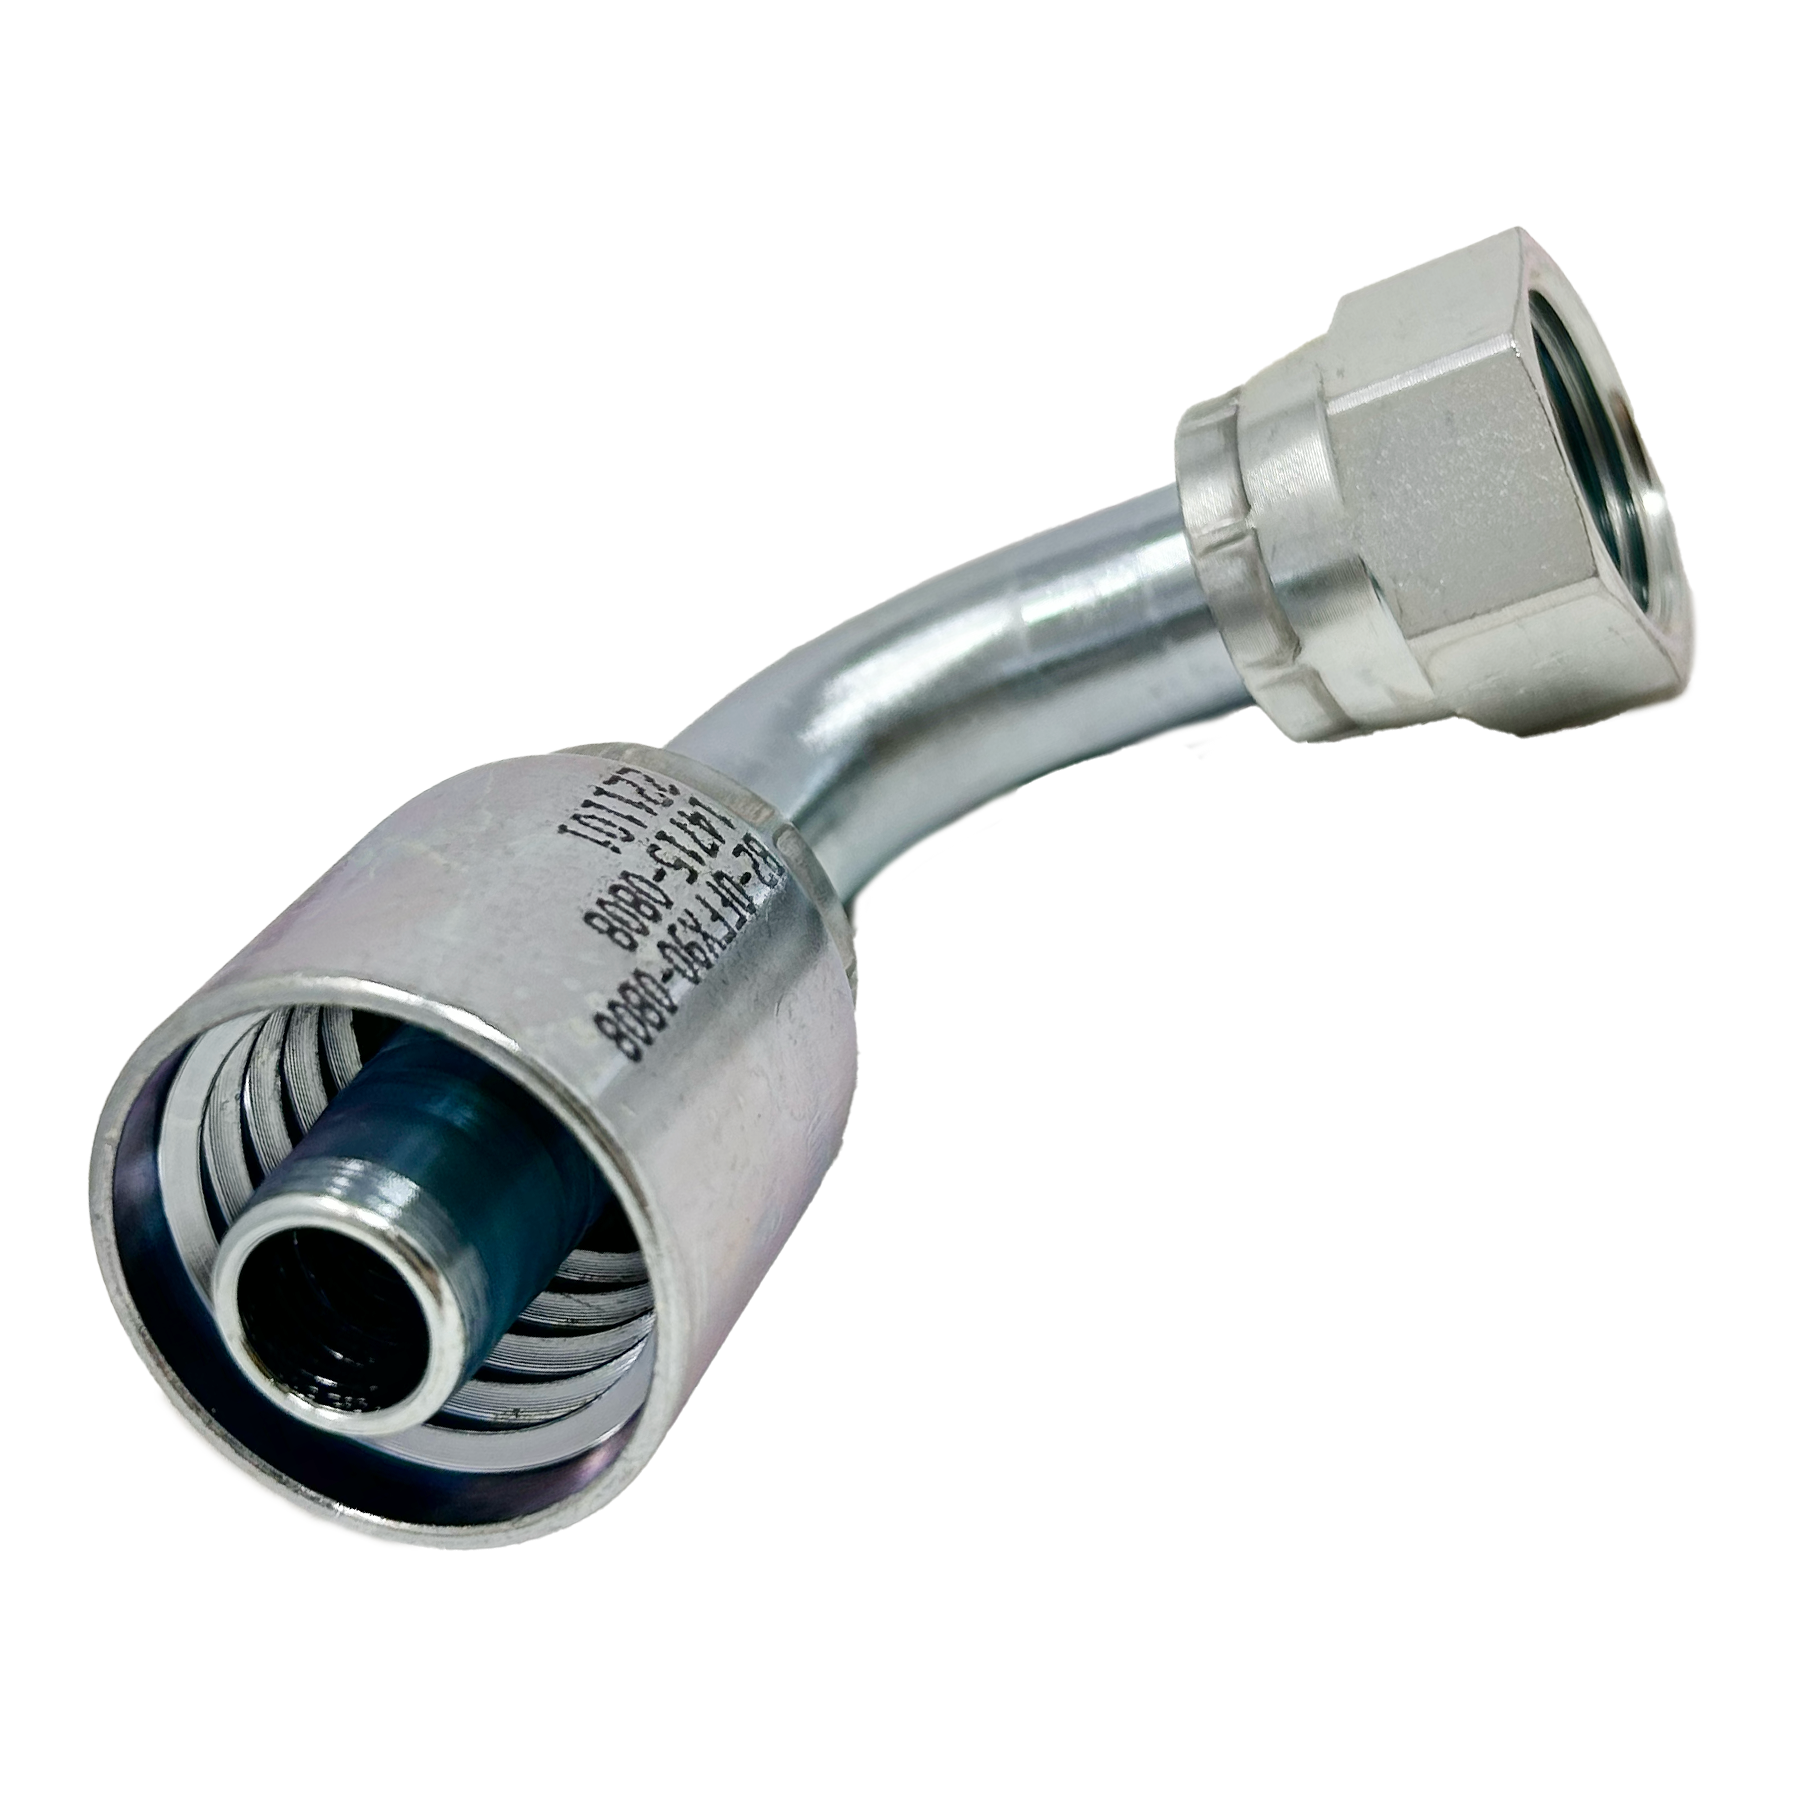 B2-OFFX90-0810: Continental Hose Fitting, 0.5 (1/2") Hose ID x 1-14 Female ORFS, 90-Degree Swivel Connection